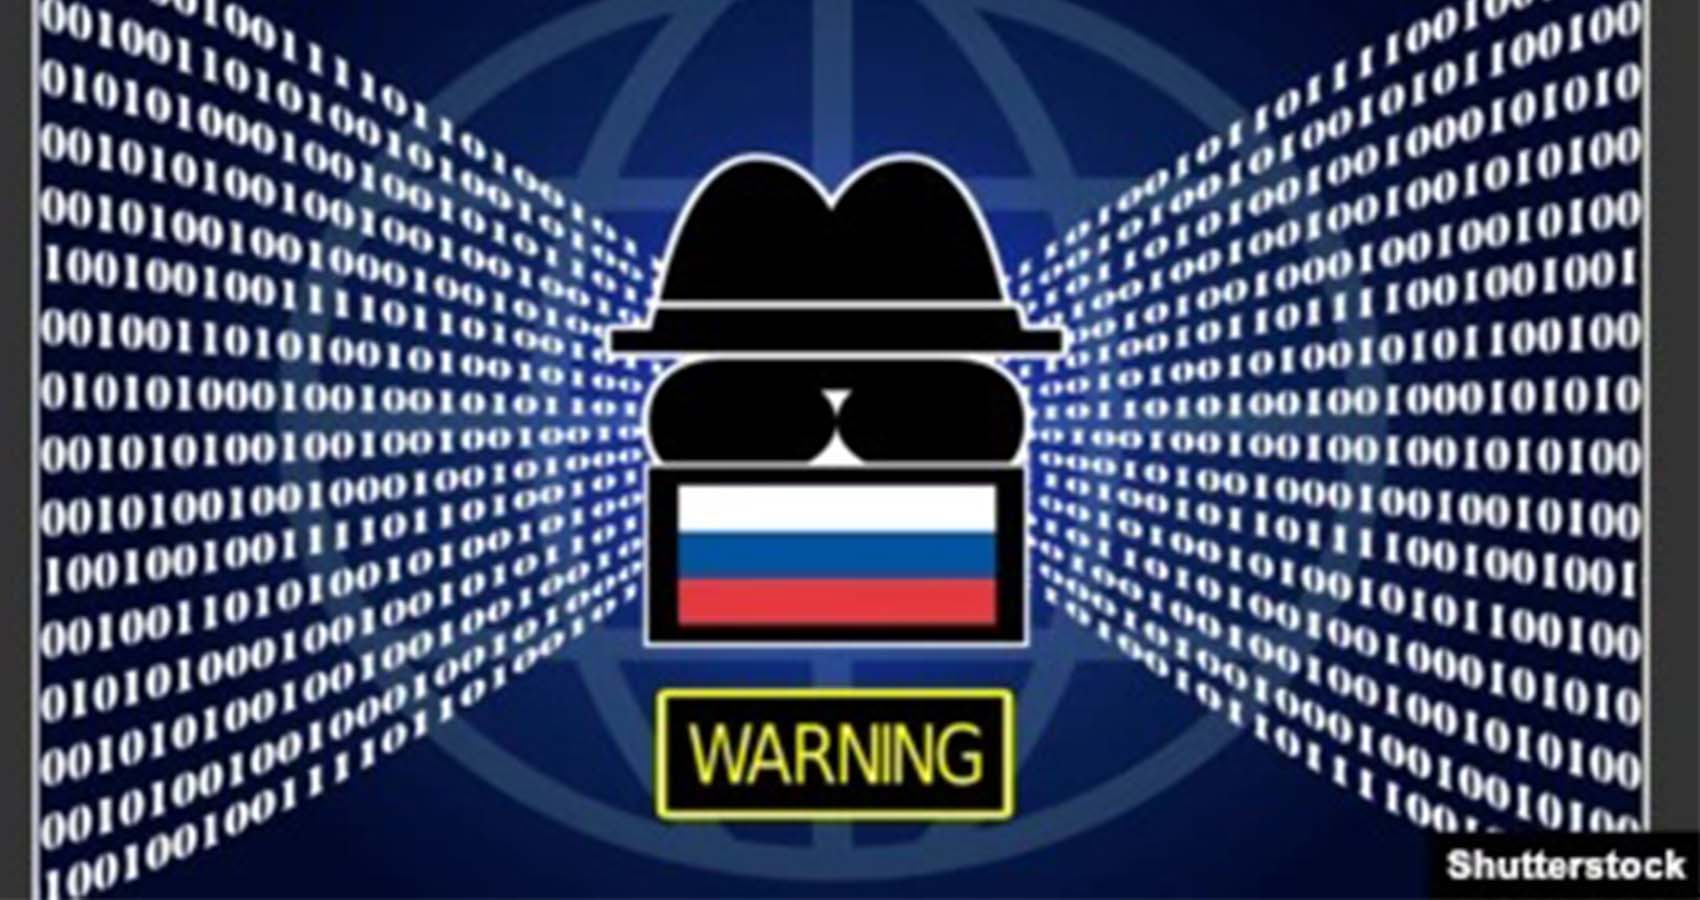 Hacking Attempts By Russian Spies Found By Microsoft